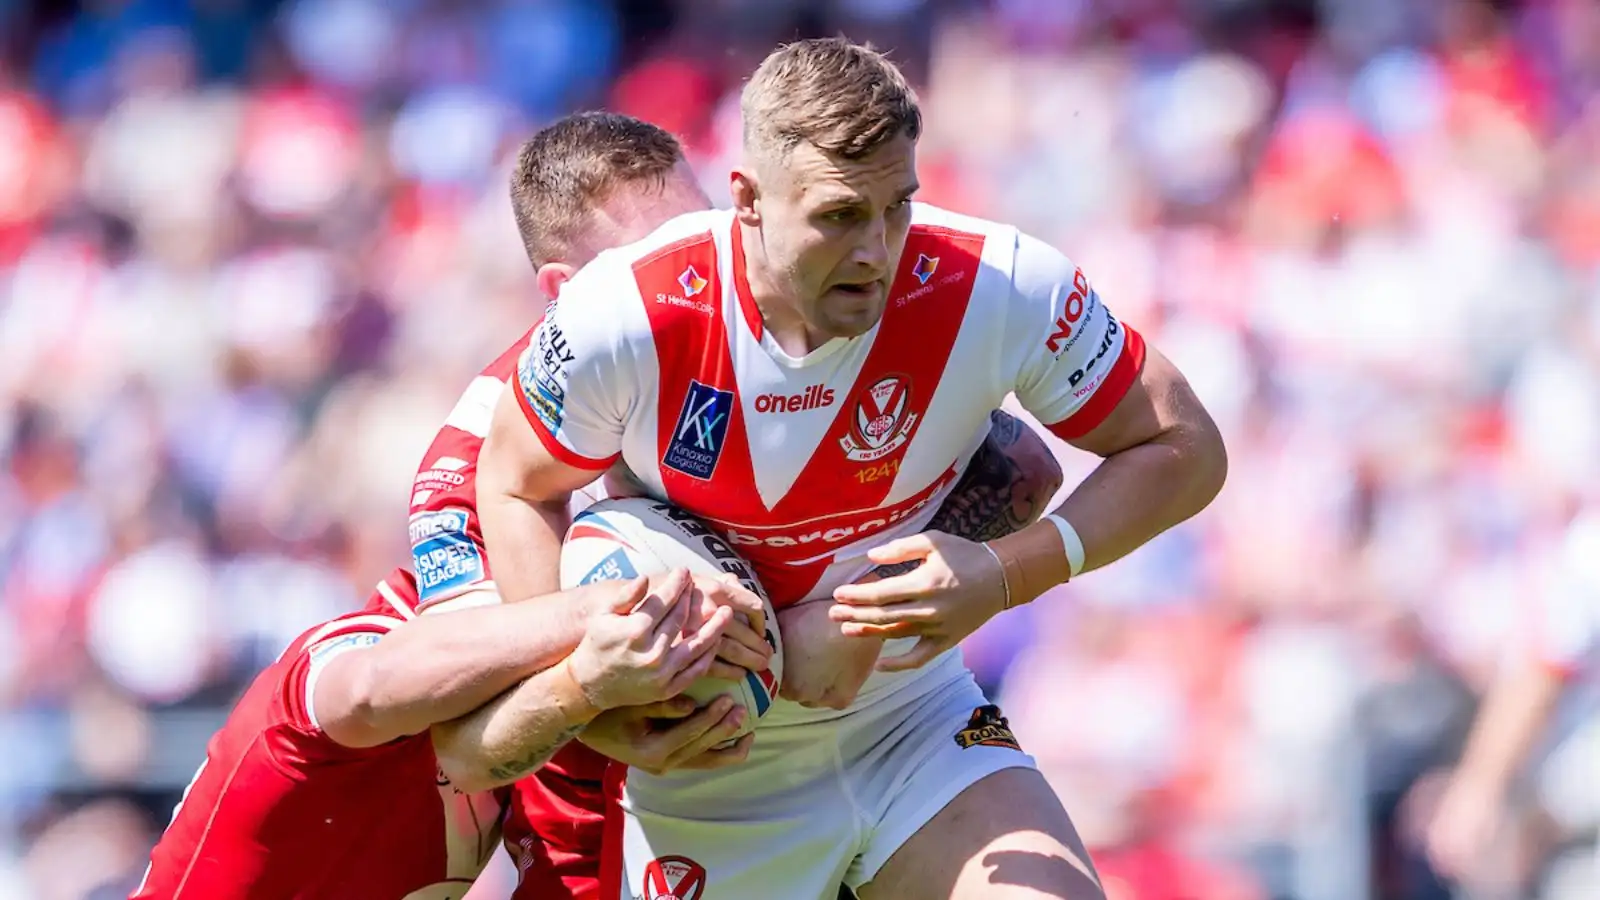 St Helens forward facing tribunal as eight players handed bans